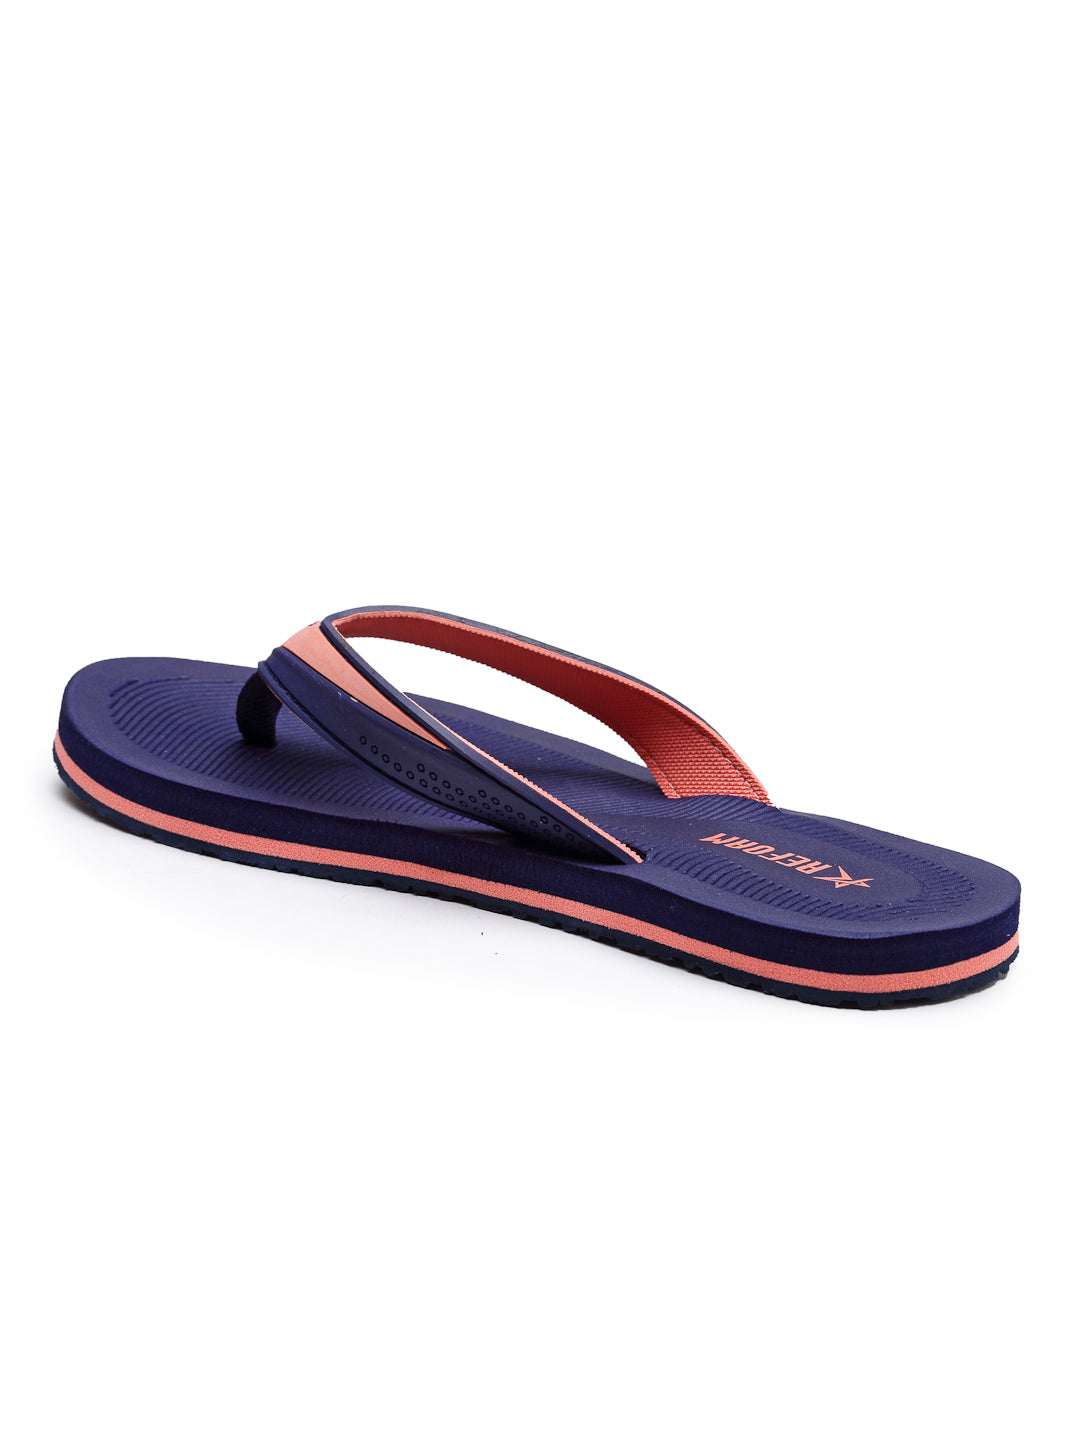 Navy Blue & Peach Solid Rubber Slip On Casual Slippers For Women